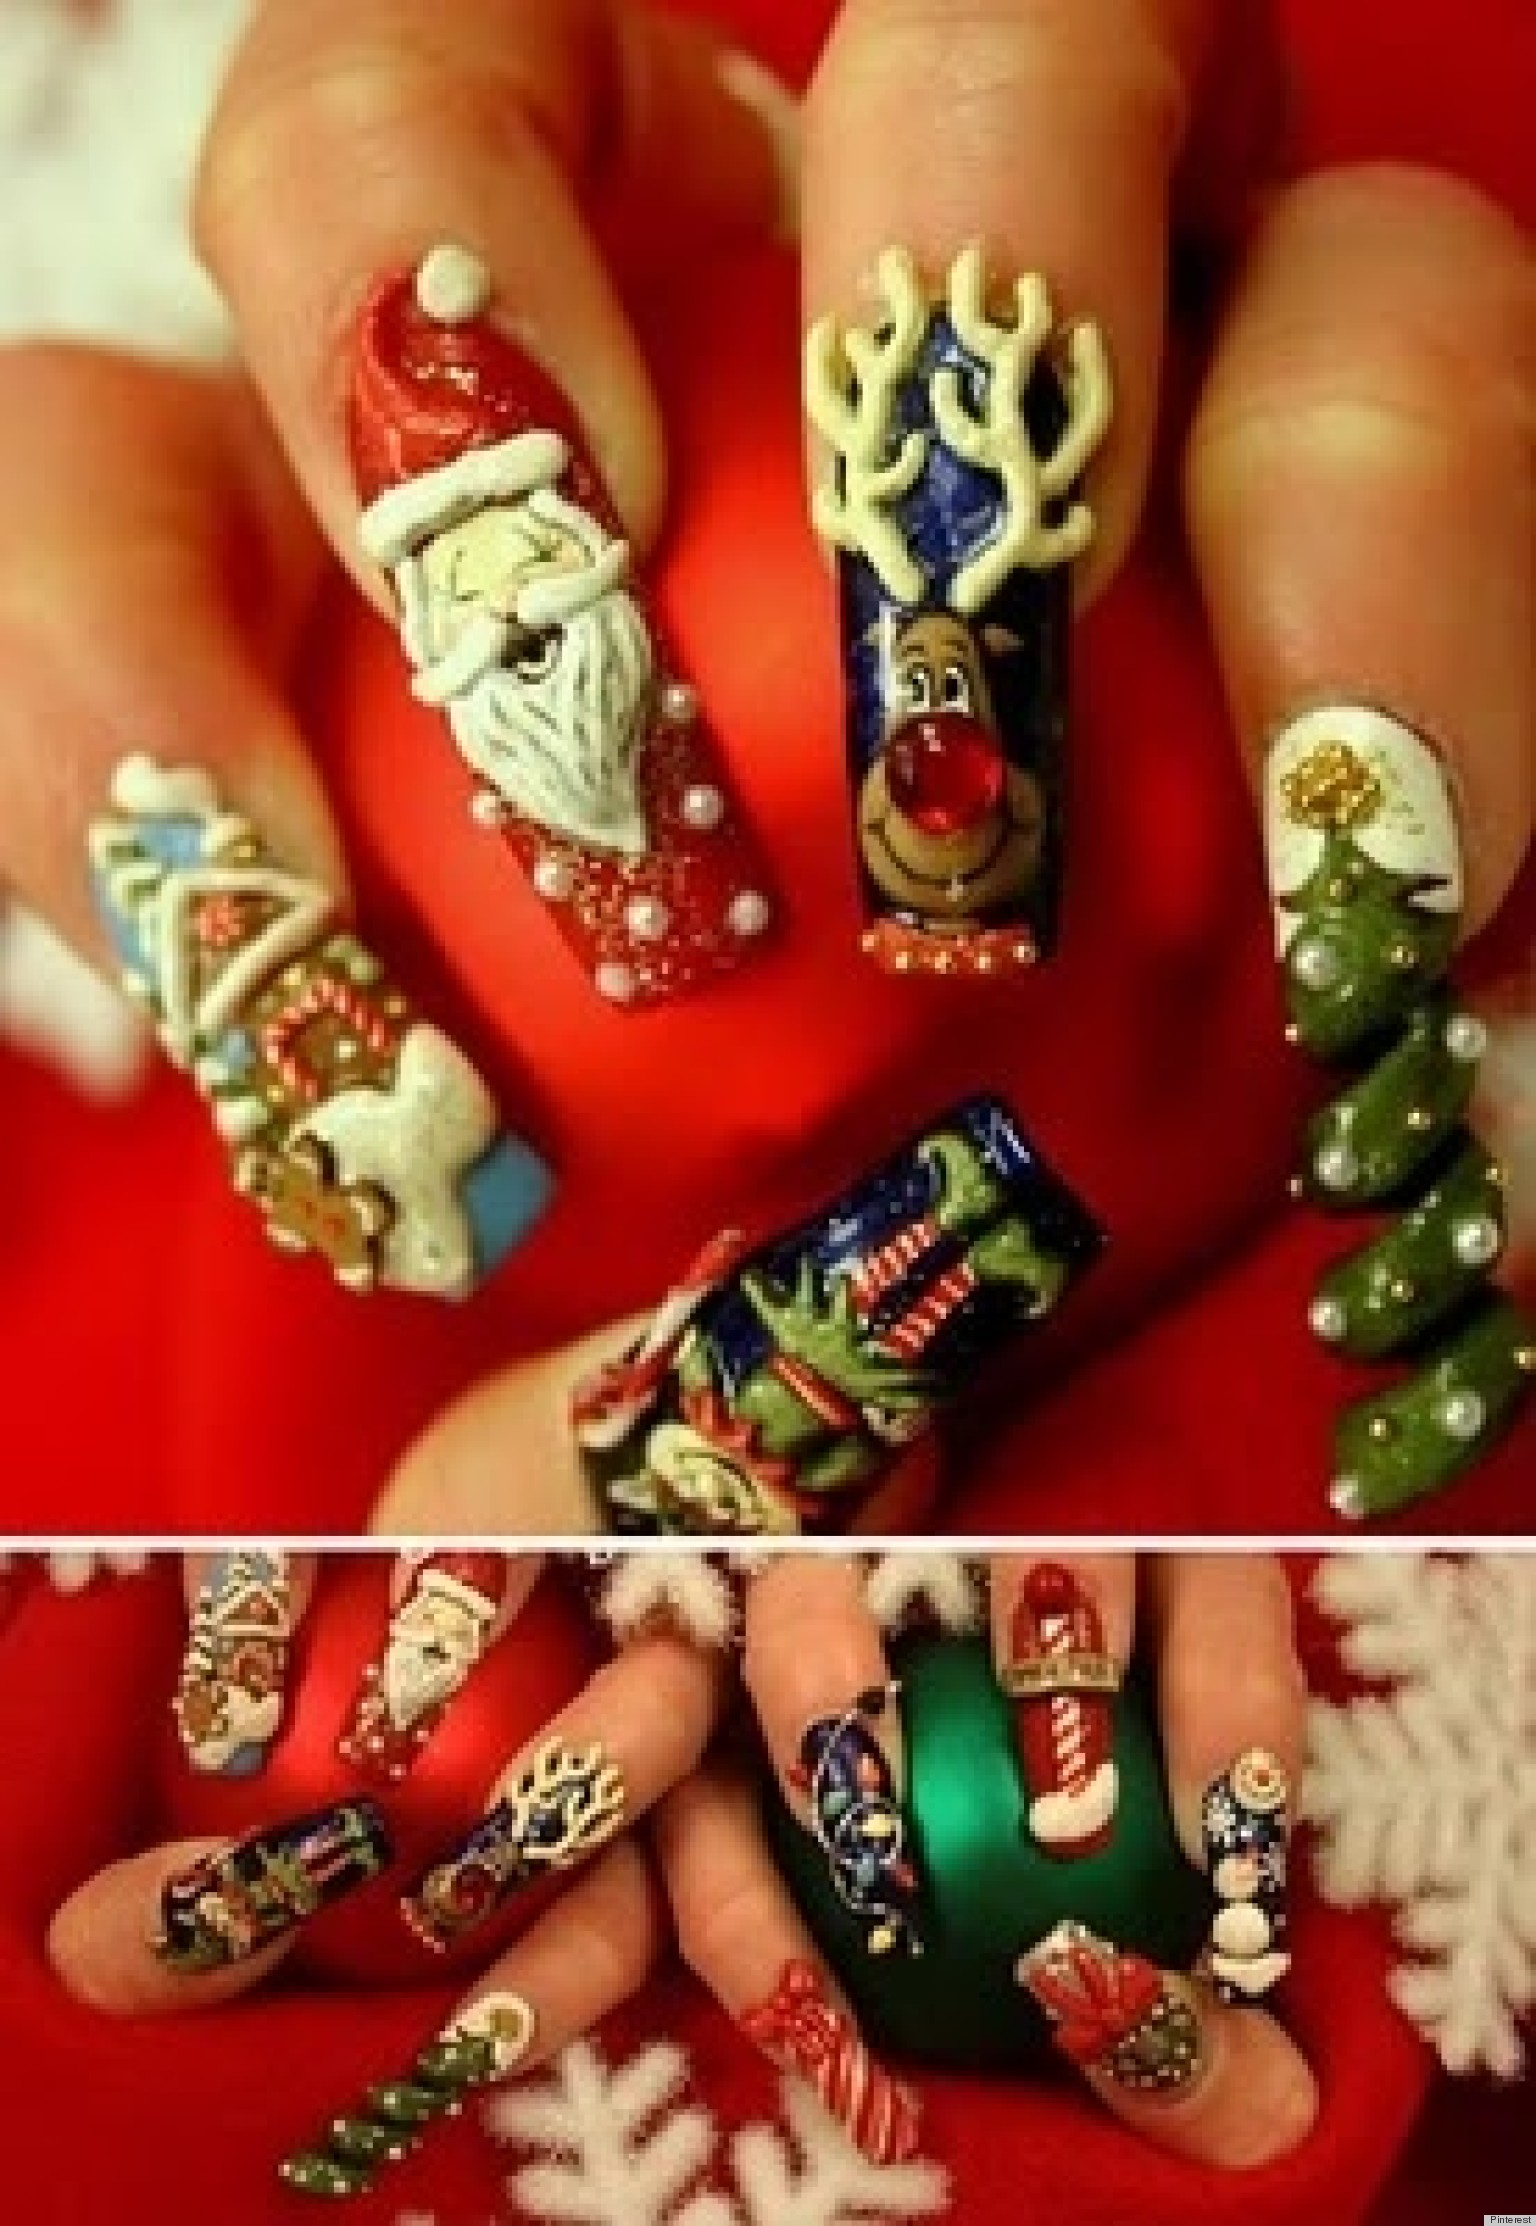 Christmas Nail Art: Santa Claus, Rudolph The RedNosed Reindeer And 